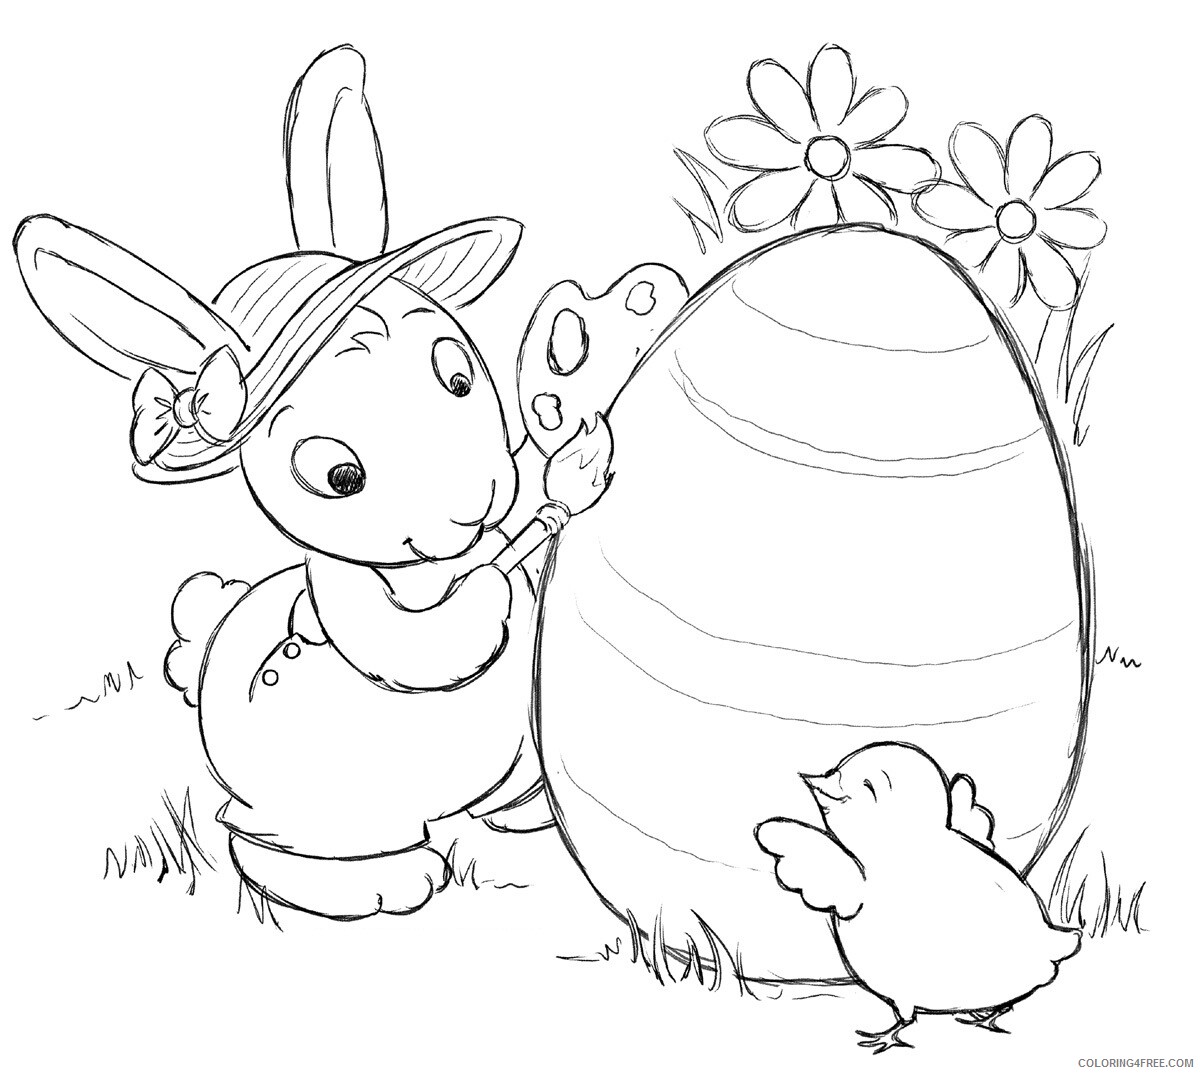 Easter Bunny Coloring Pages Holiday of Easter Bunny Printable 2021 0404  Coloring4free - Coloring4Free.com